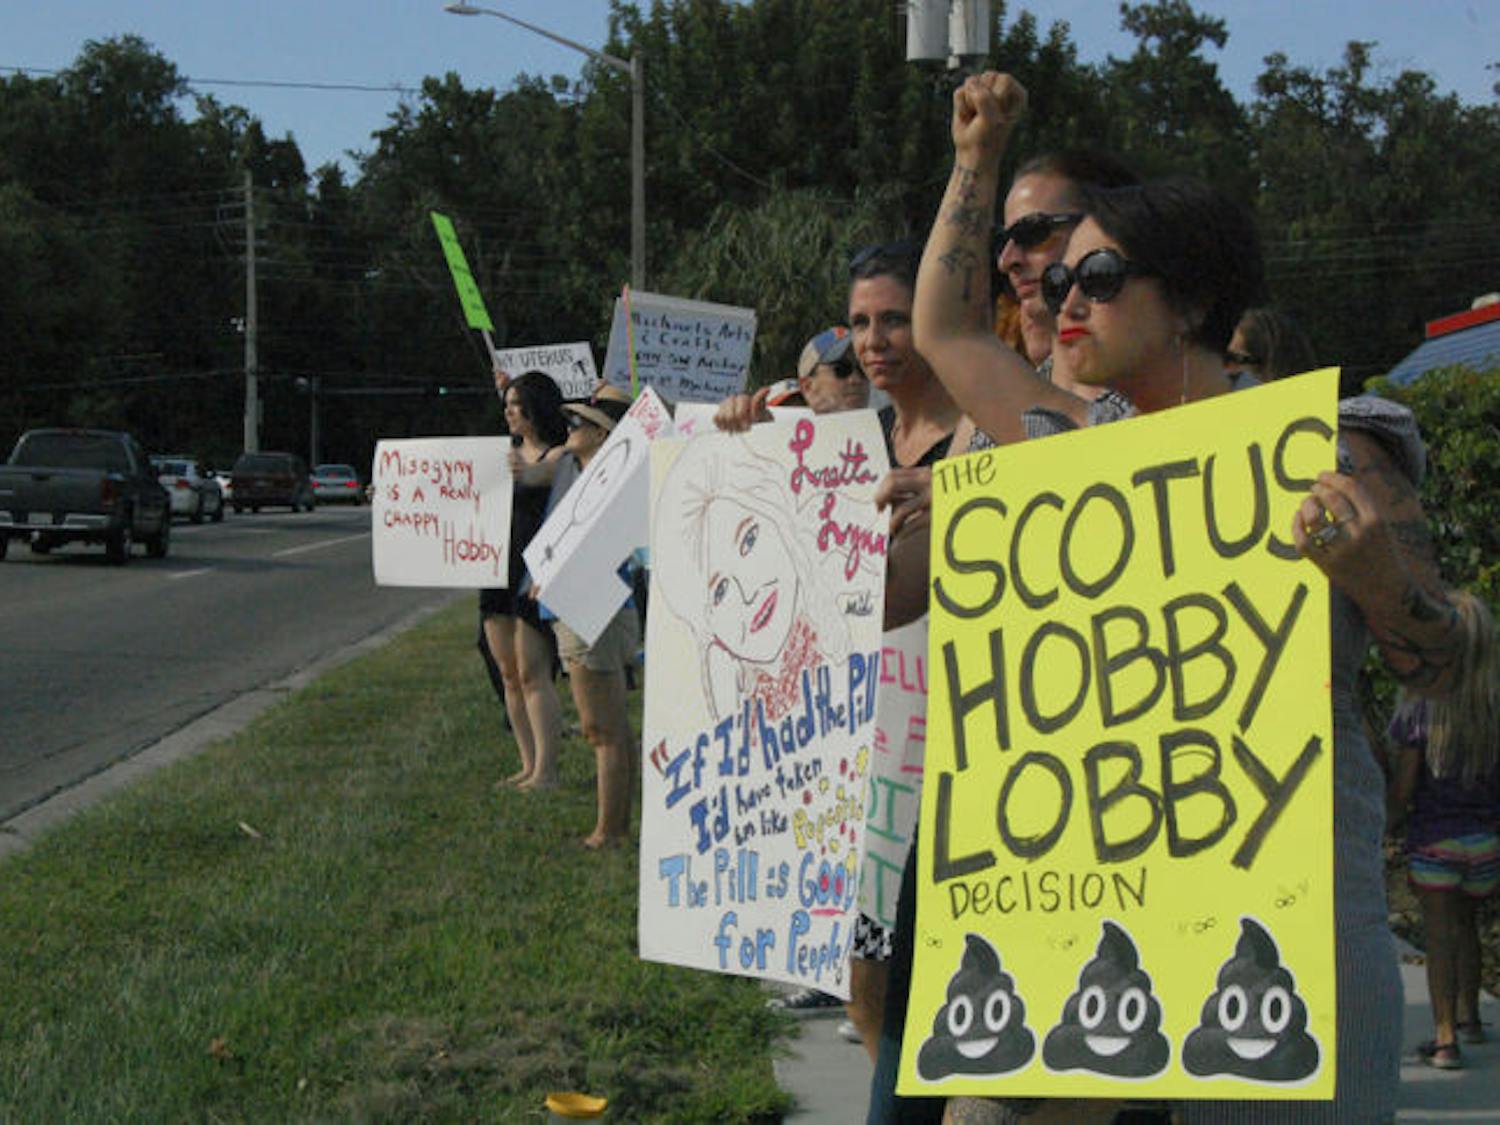 Members of the Gainesville chapter of the National Organization of Women, National Women’s Liberation and Gainesville citizens protest the opening of Hobby Lobby next to the Oaks Mall on Friday. They waved signs on Southwest 62nd Boulevard to let their voices be heard about the Hobby Lobby v. Burwell decision.